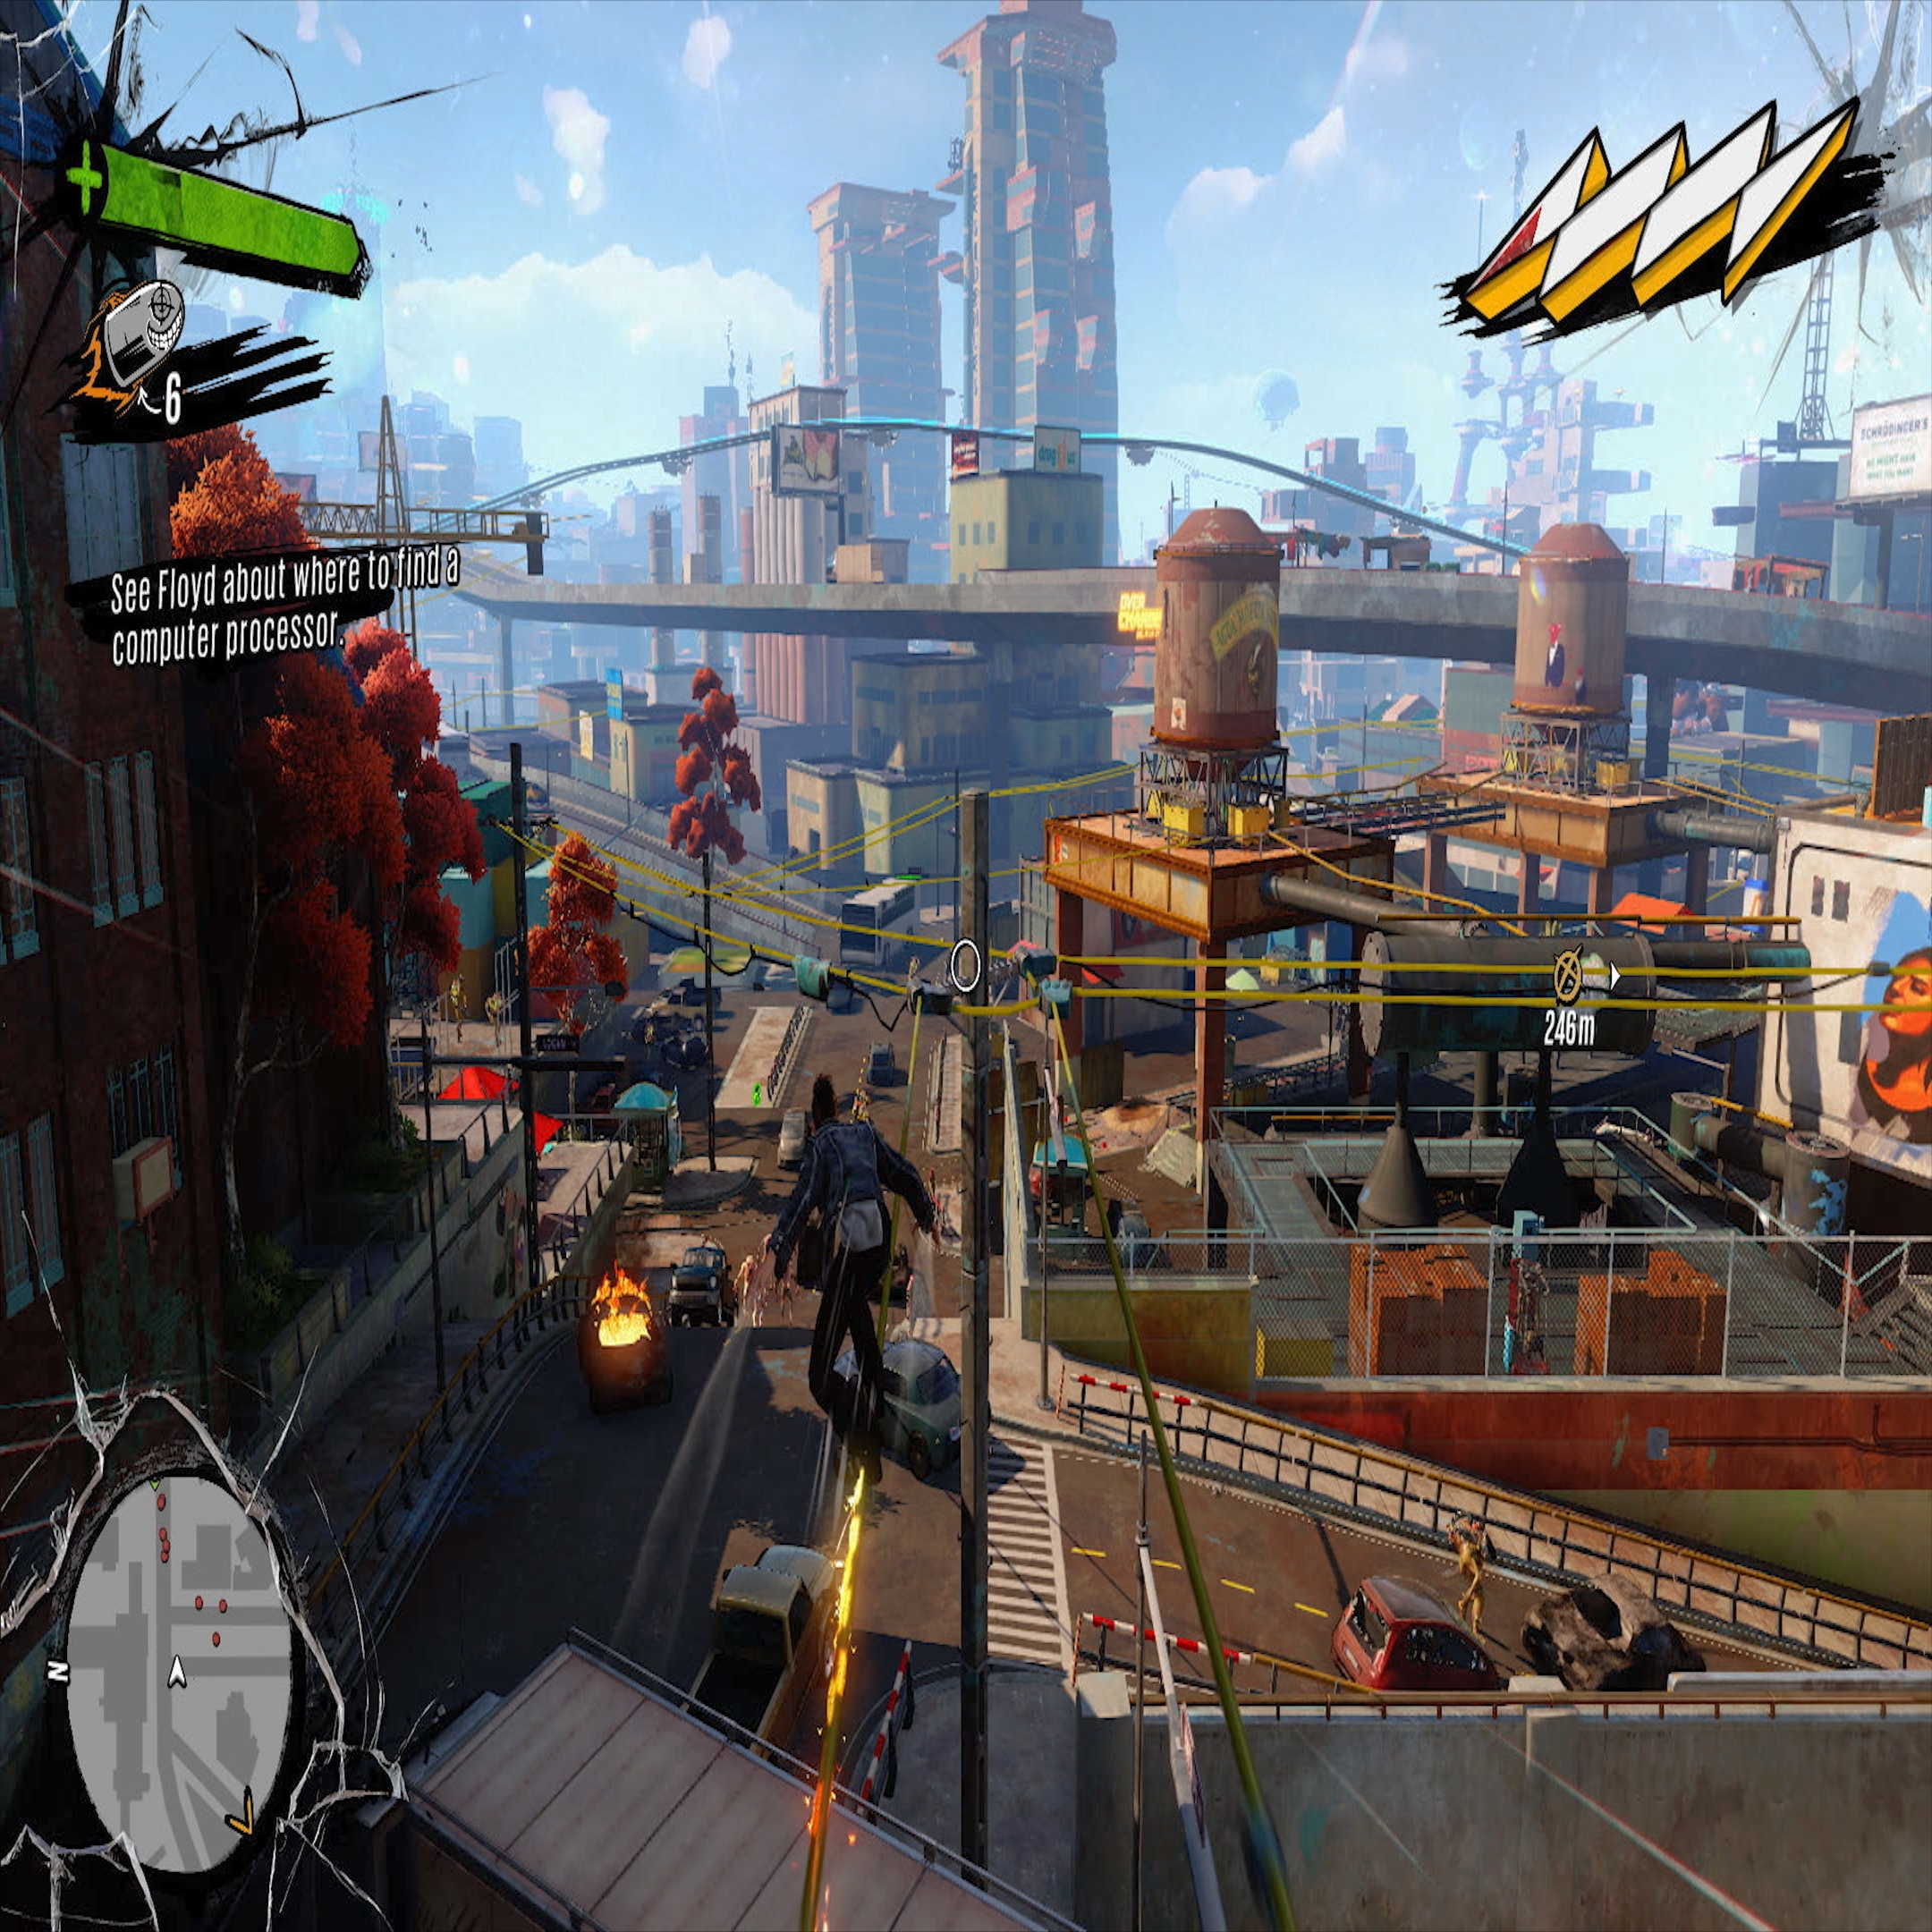 Xbox One exclusive Sunset Overdrive gets rated for a PC release